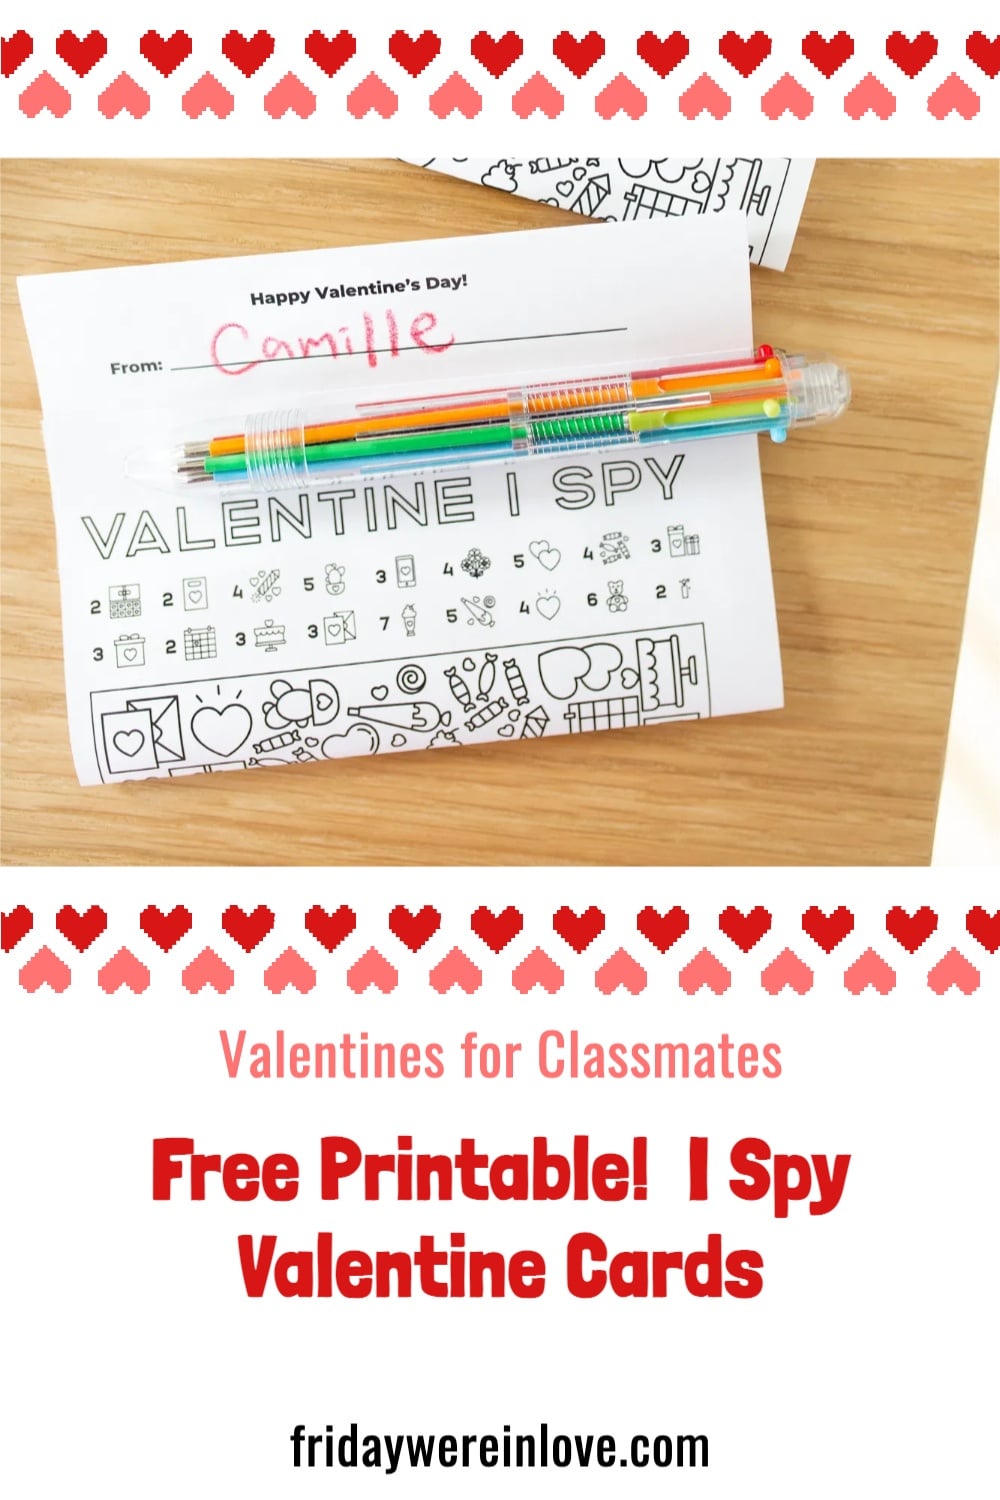 Valentines for Classmates: Printable Valentine Card - Friday We're In Love